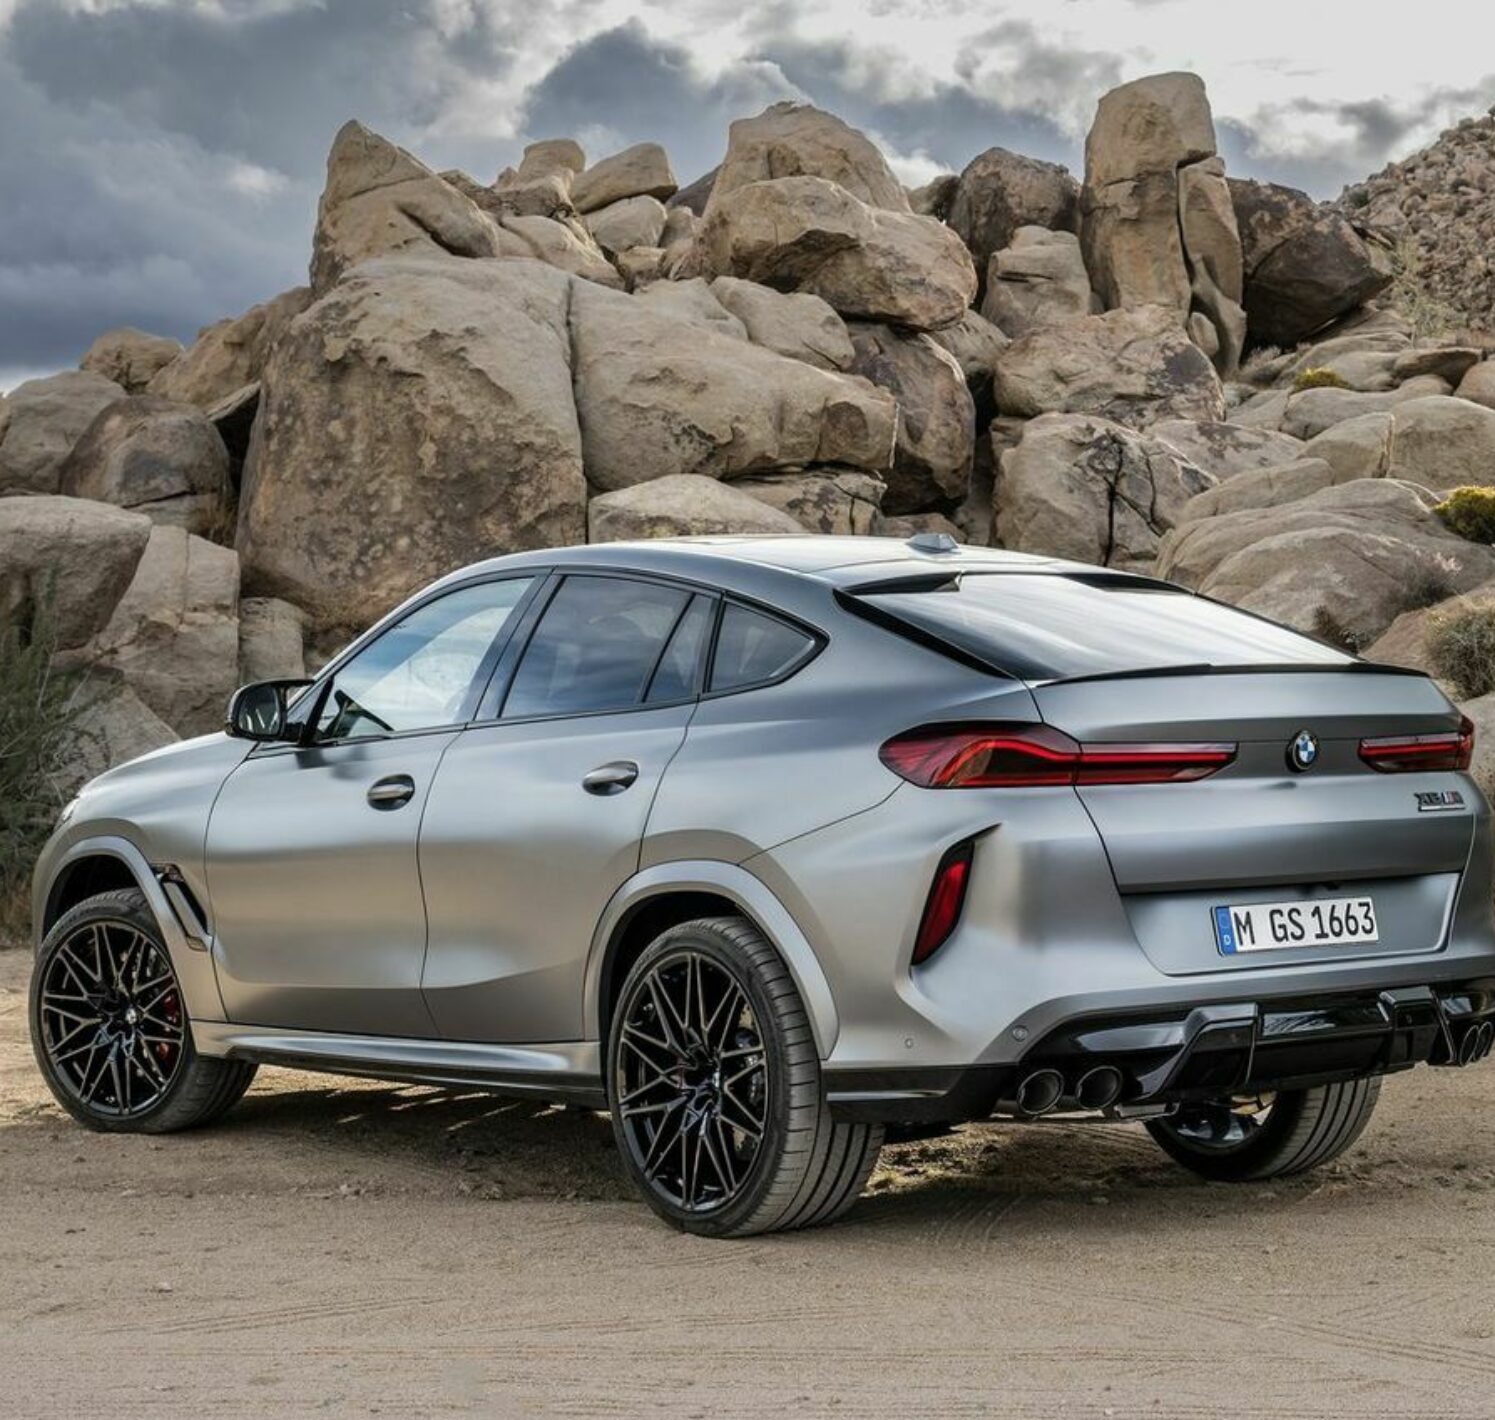 https://autofilter.sk/assets/images/x6-m-competition/gallery/bmw-x6-m-competition-4-galeria.jpg - obrazok